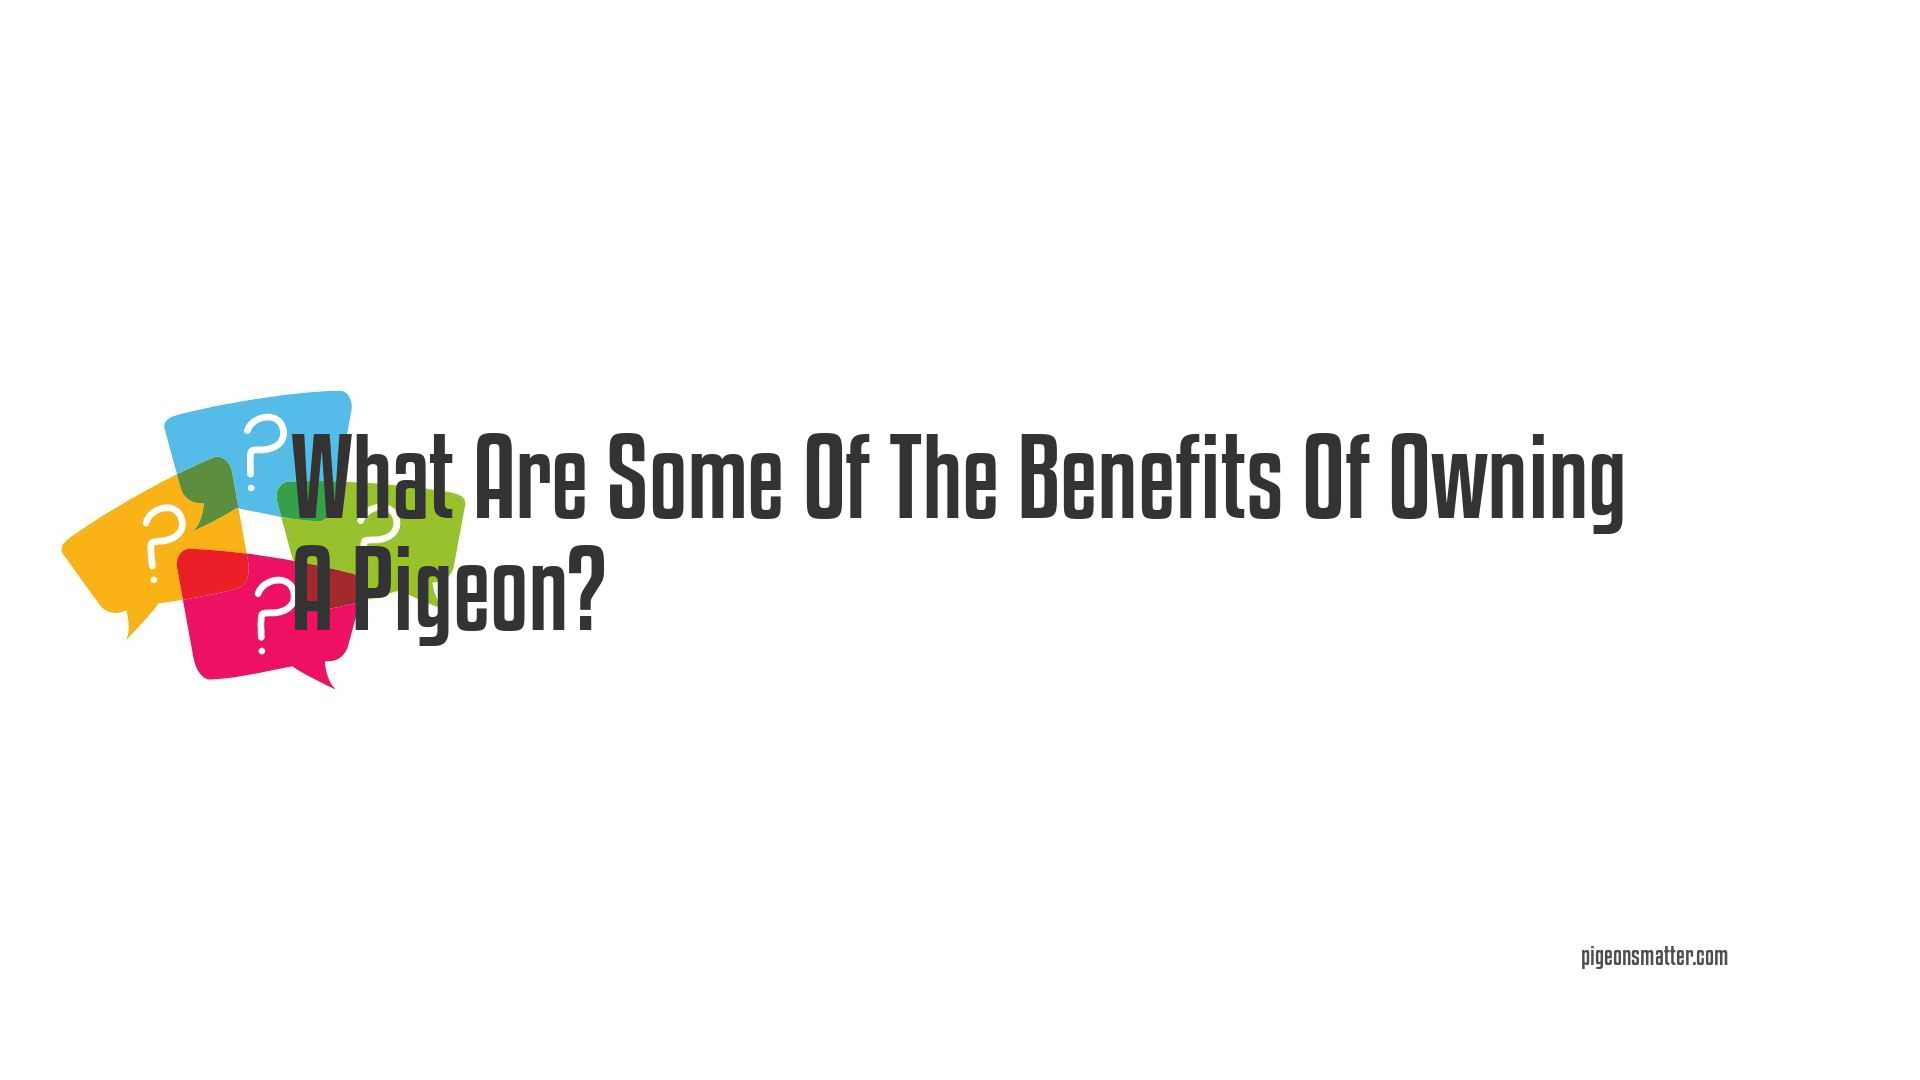 What Are Some Of The Benefits Of Owning A Pigeon?